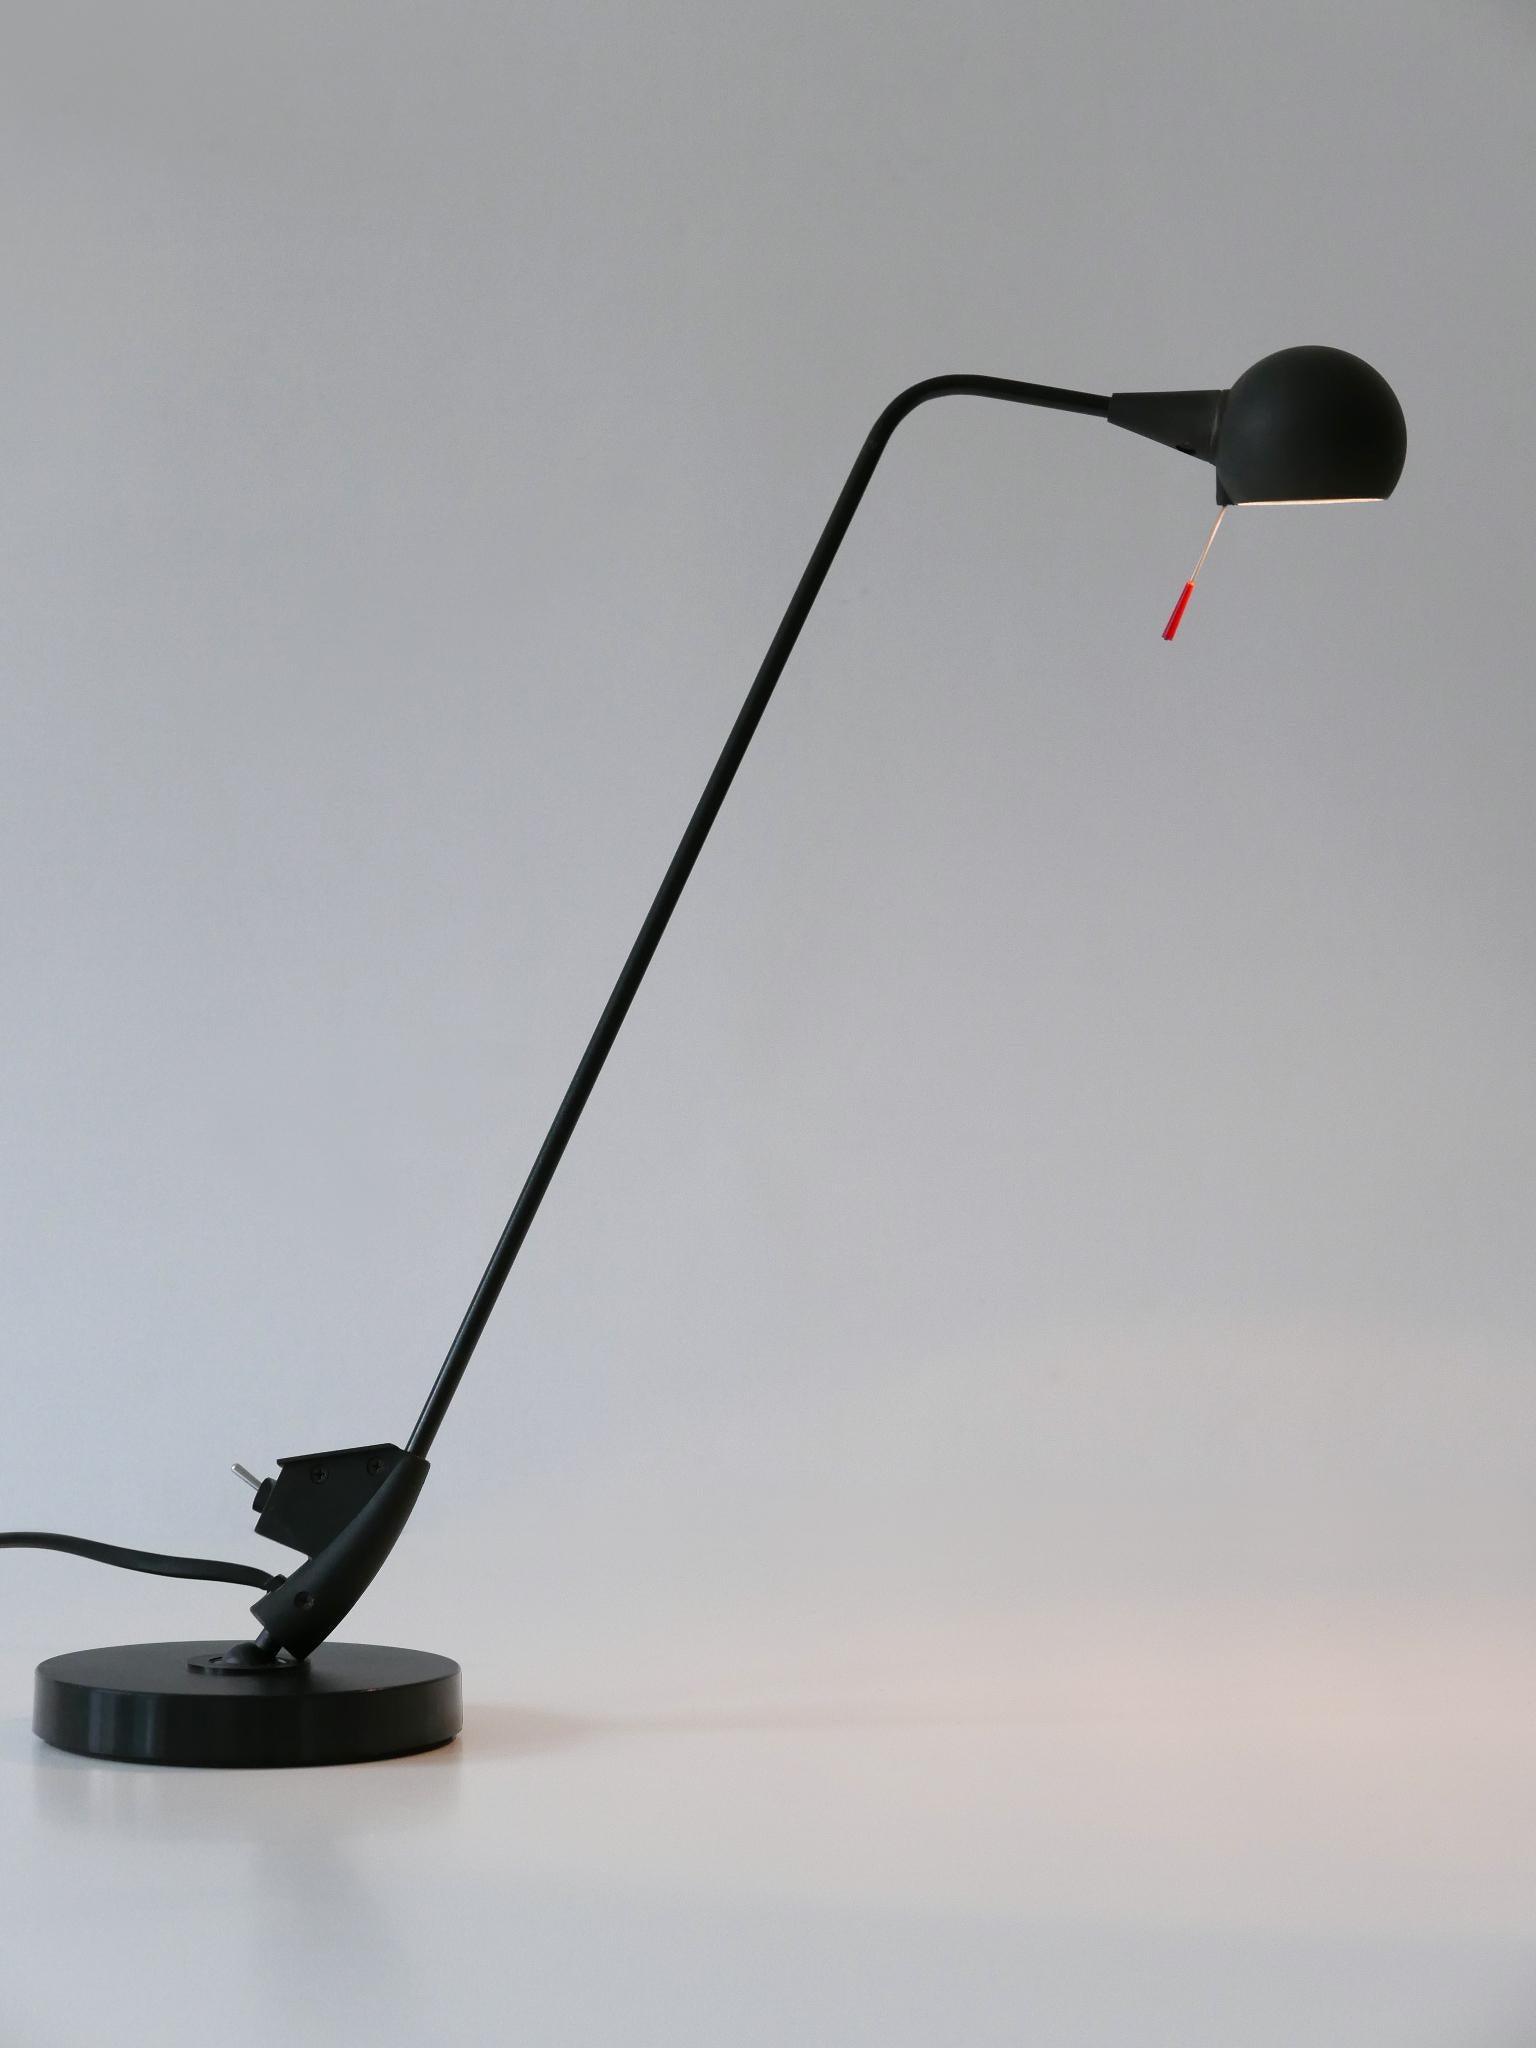 Rare, elegant, minimalistic and articulated table lamp or desk light 'Fire Fly'. Designed by Emanuele Ricci, 1989 for Sidecar / Artemide, Italy. 
With adjustable arm and 360° rotating diffusor. 

Executed in black painted metal, the table lamp /